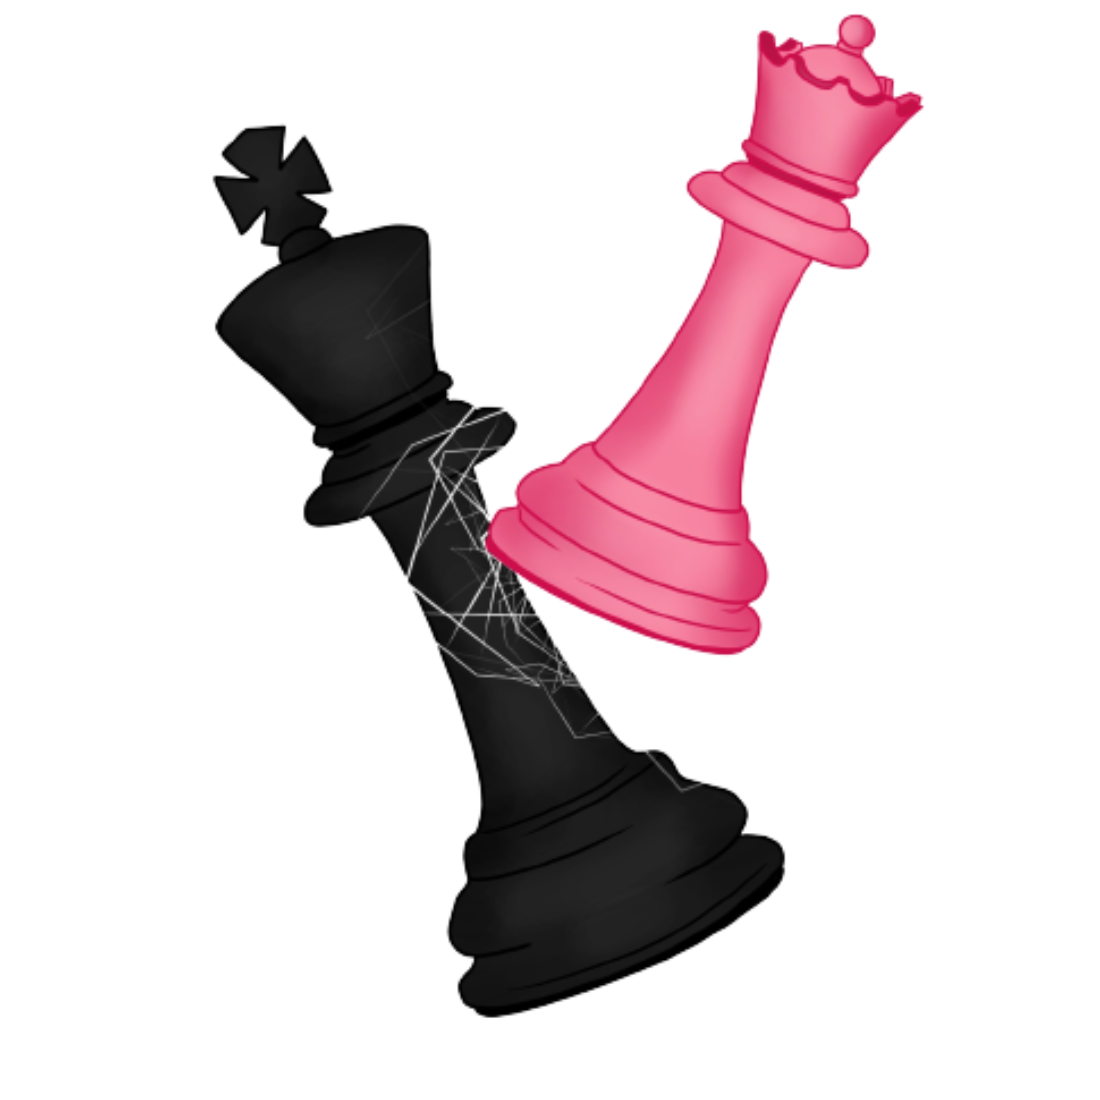 T-shirt Chess Designs cover image.